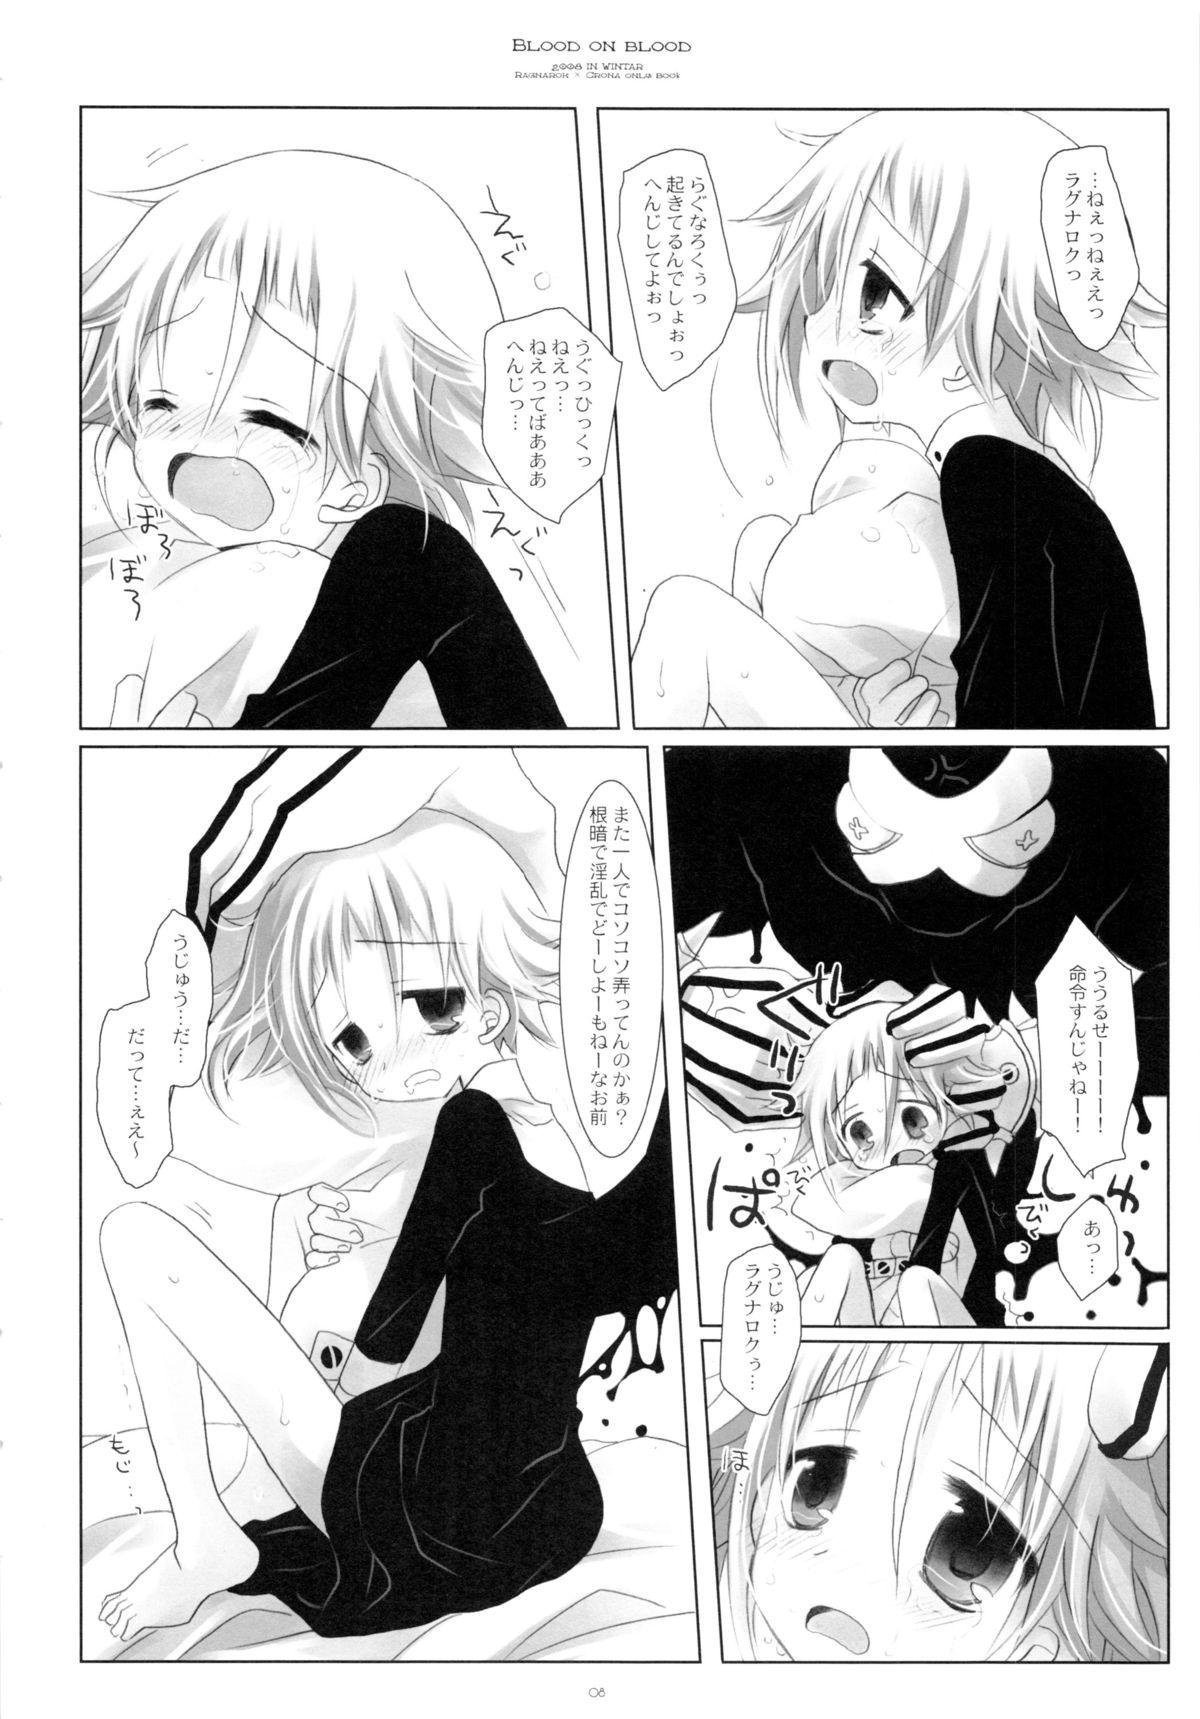 Periscope BLOOD ON BLOOD - Soul eater Ecchi - Page 7